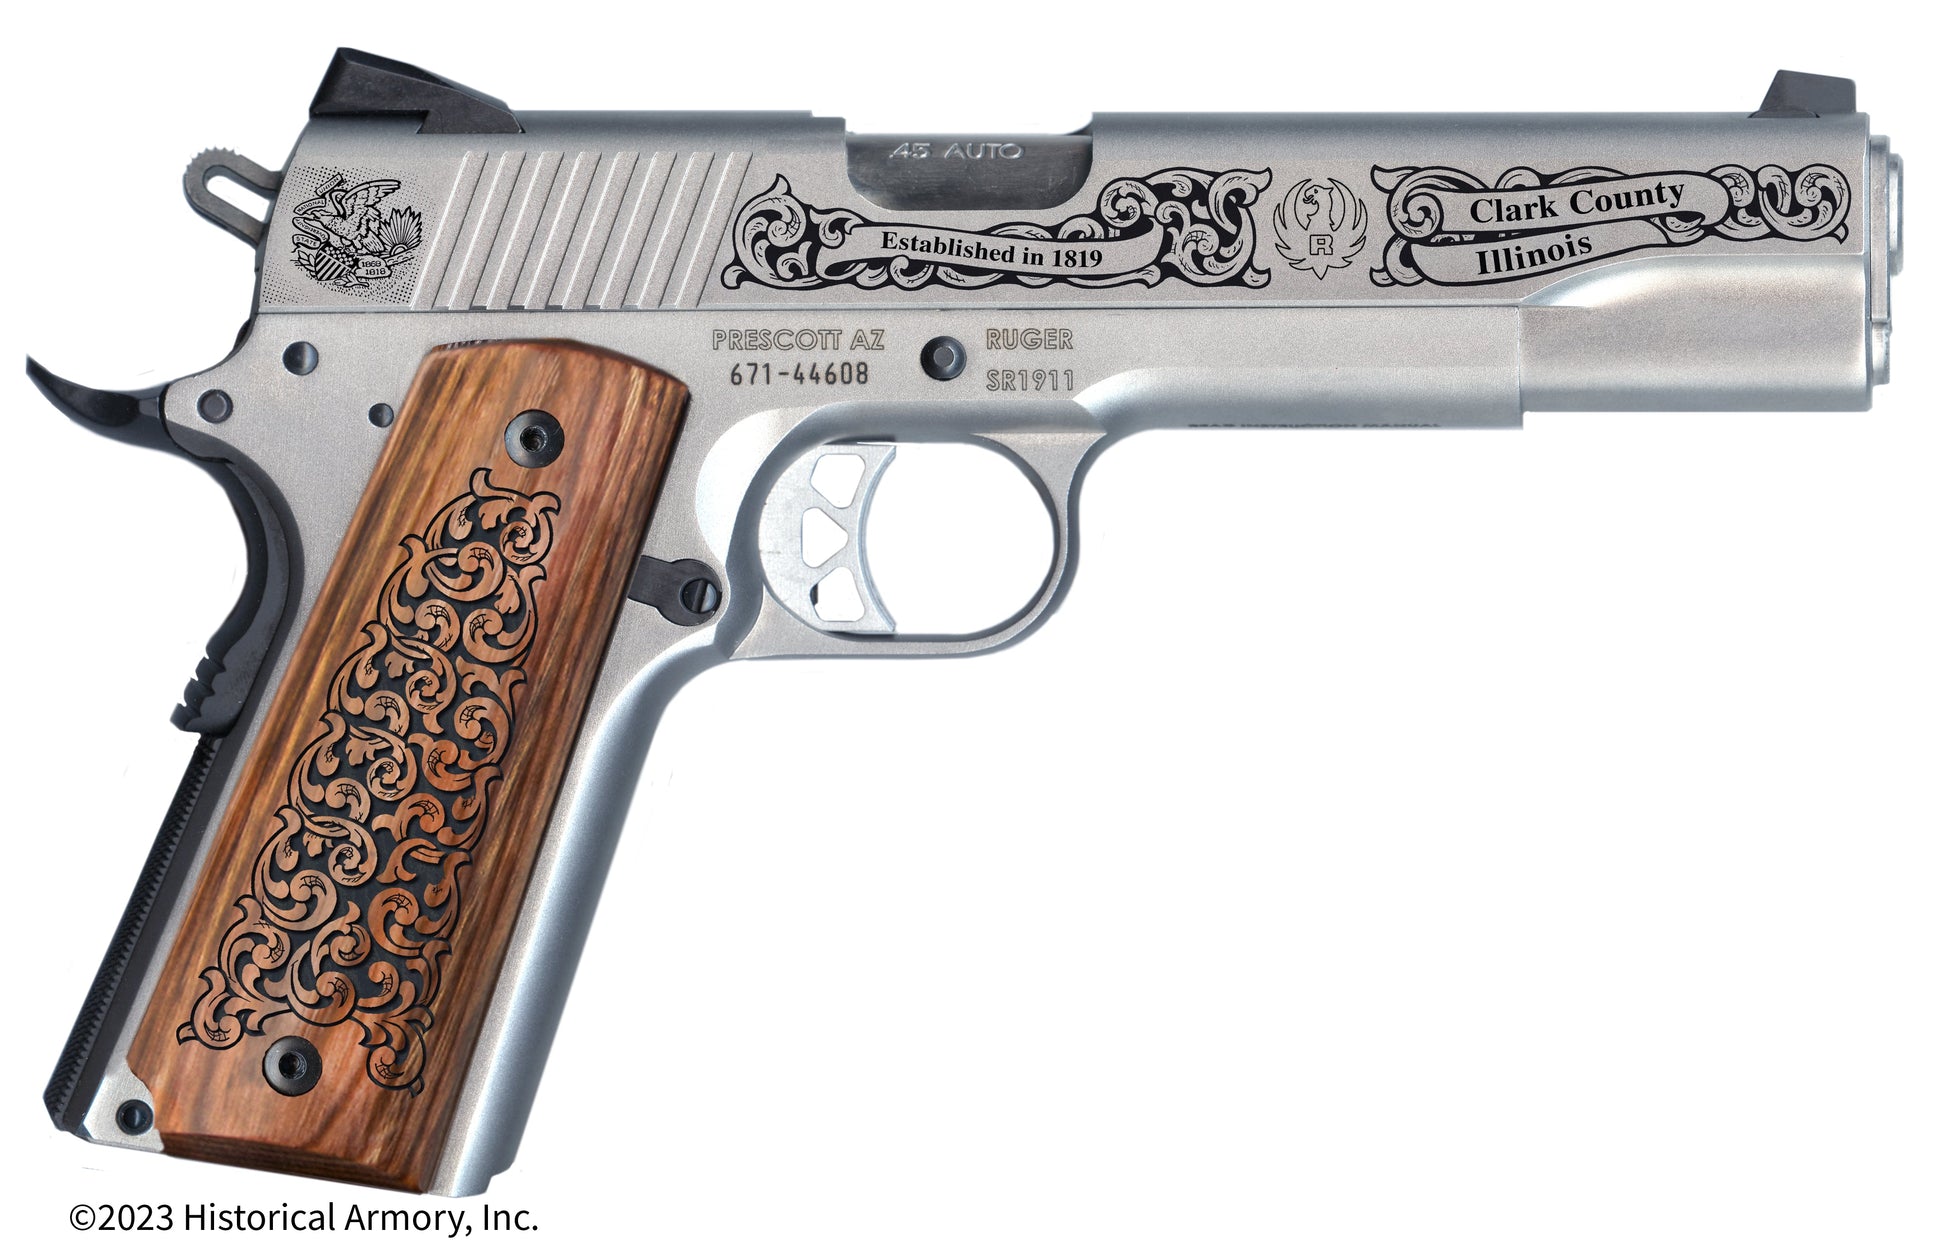 Clark County Illinois Engraved .45 Auto Ruger 1911